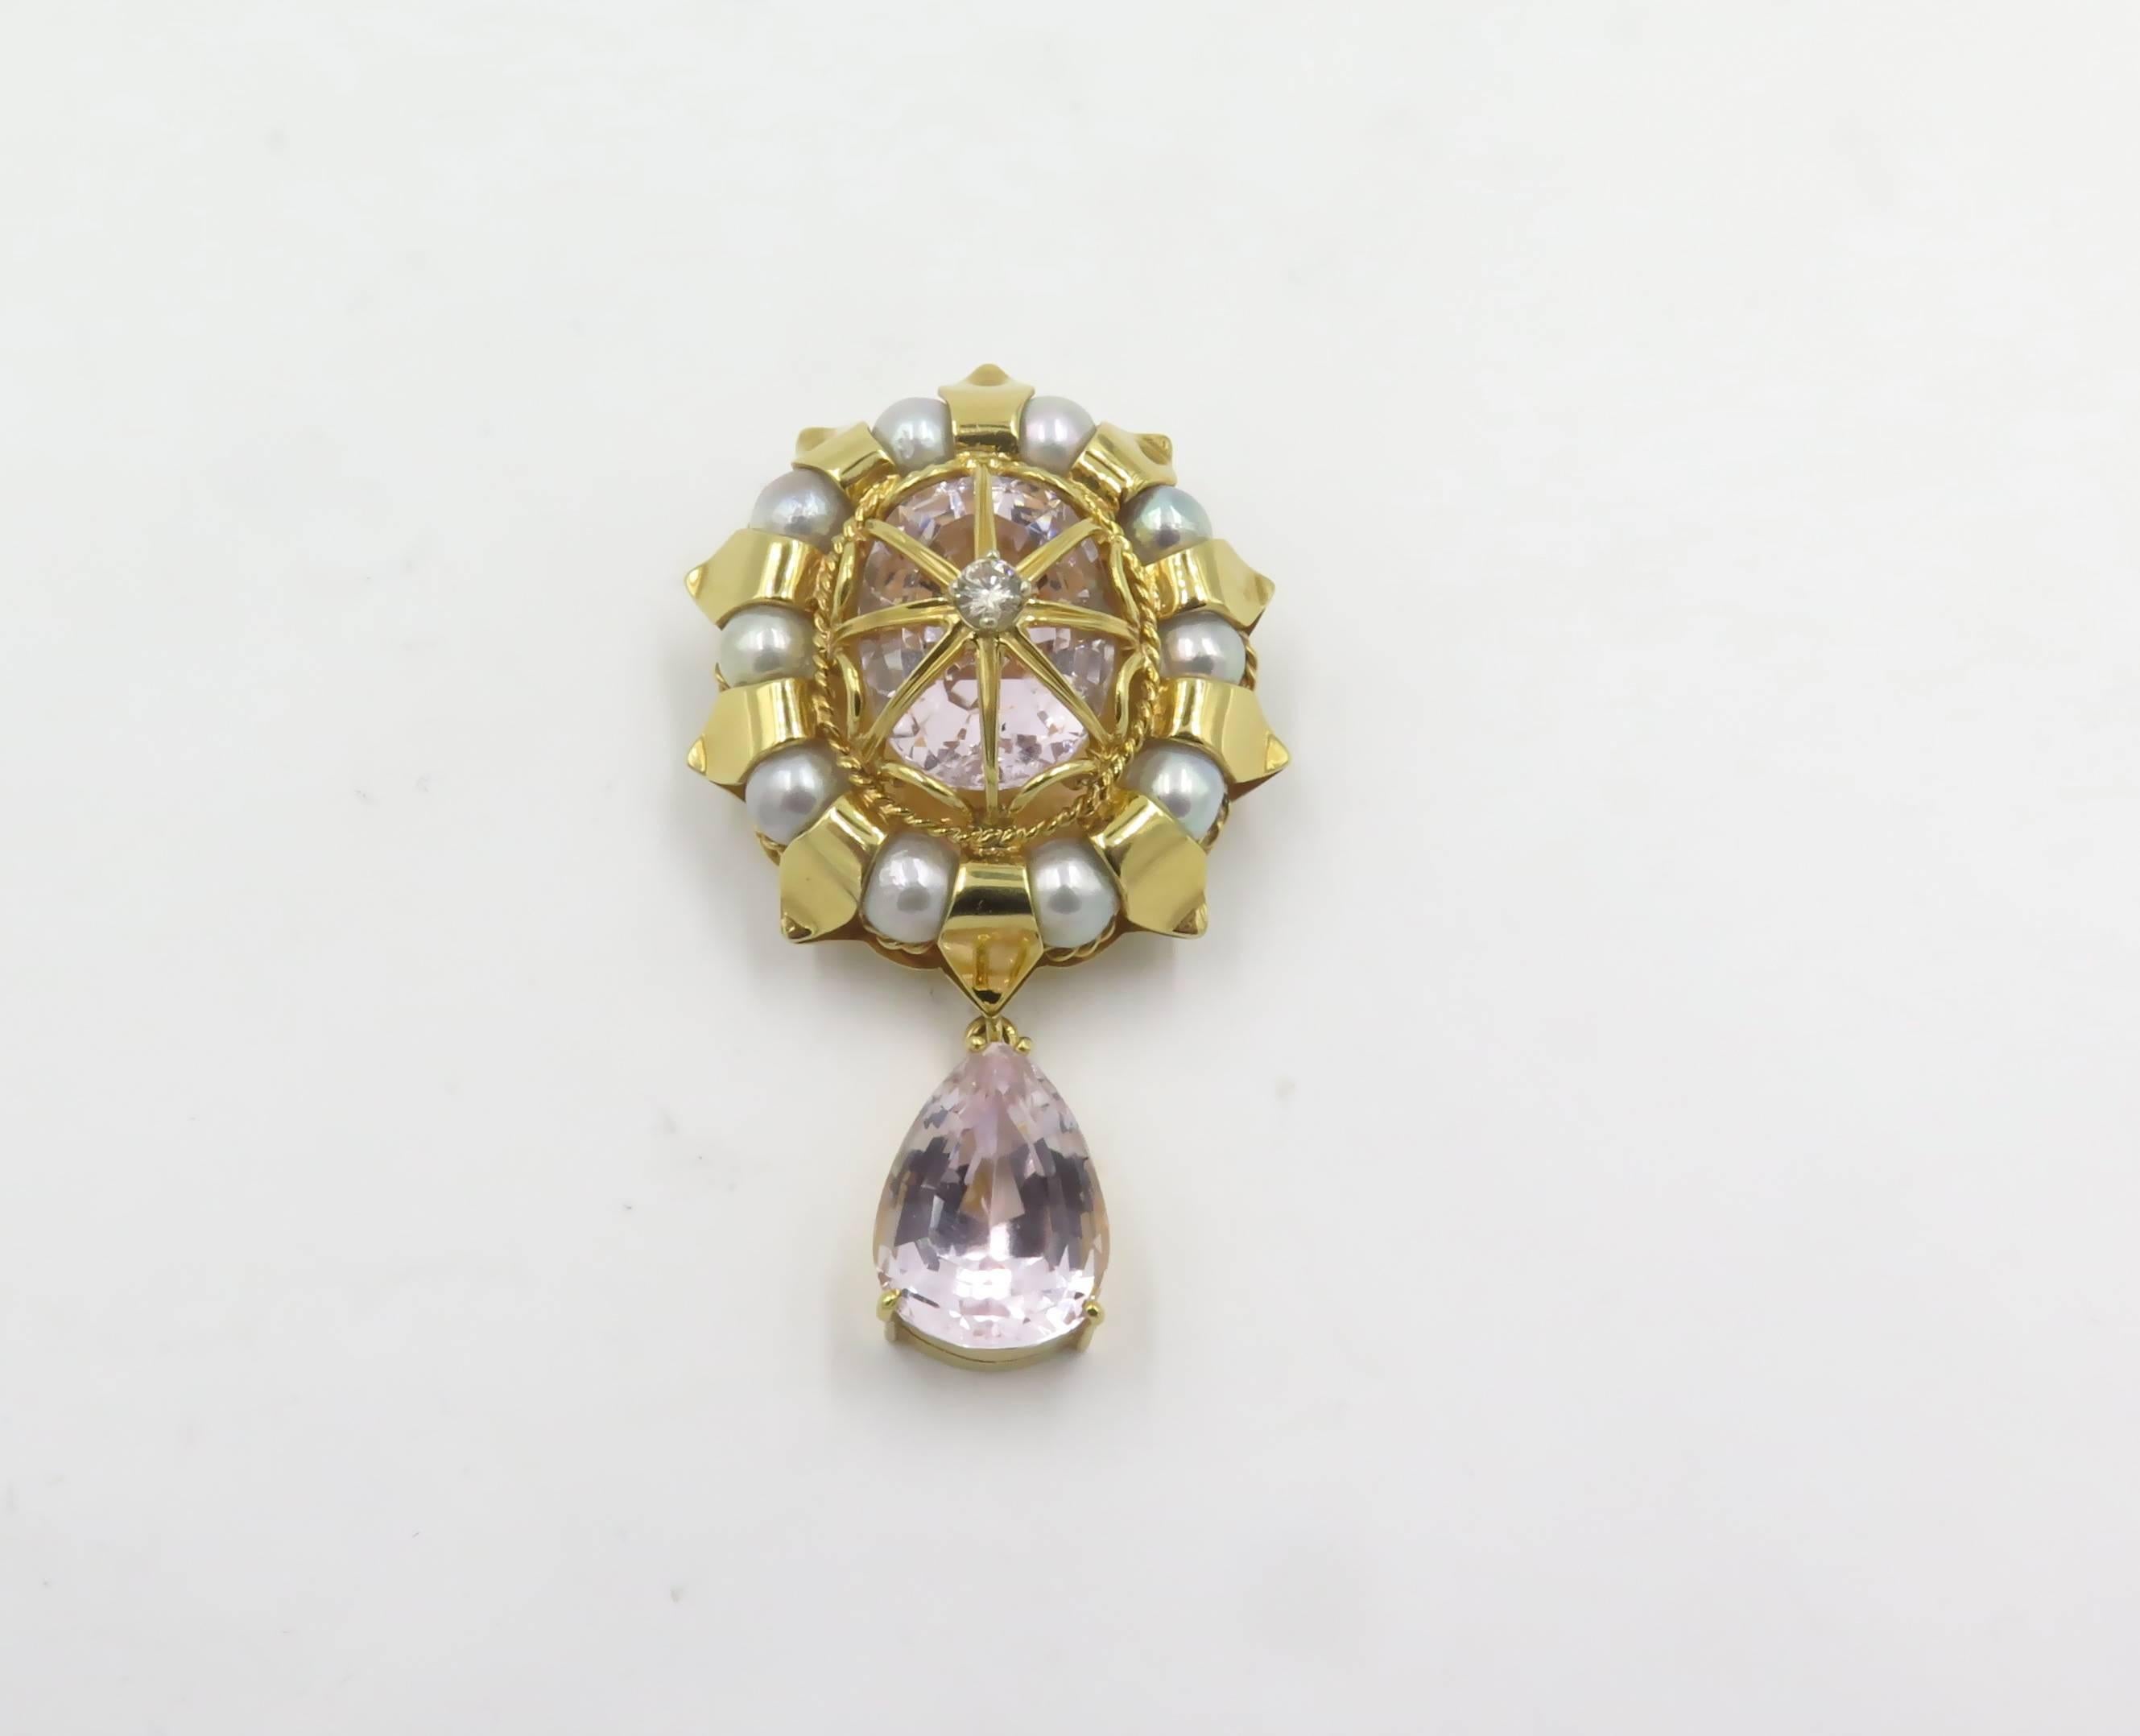 An 18 karat yellow gold, cultured pearl, Kunzite and diamond brooch.  Signed Tony Duquette.  With bail, can be worn as a pendant. Length is approximately 2 1/4 inches. Gross weight is approximately 29.1 grams.